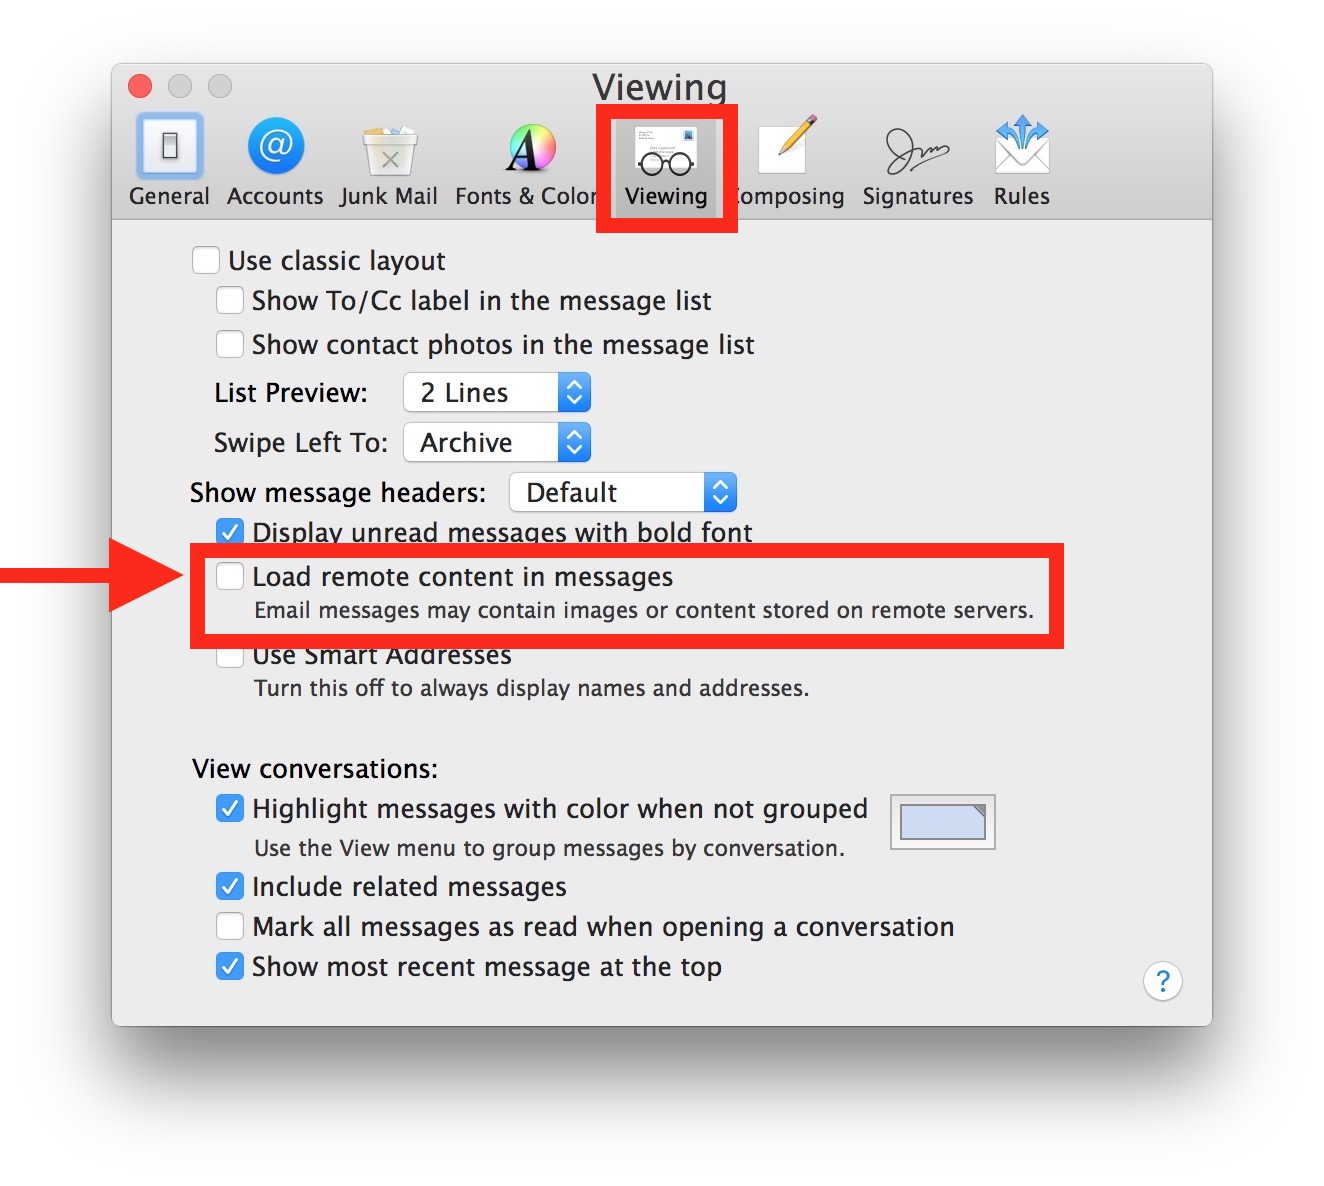 How to disable remote loading content and images in Mail for Mac